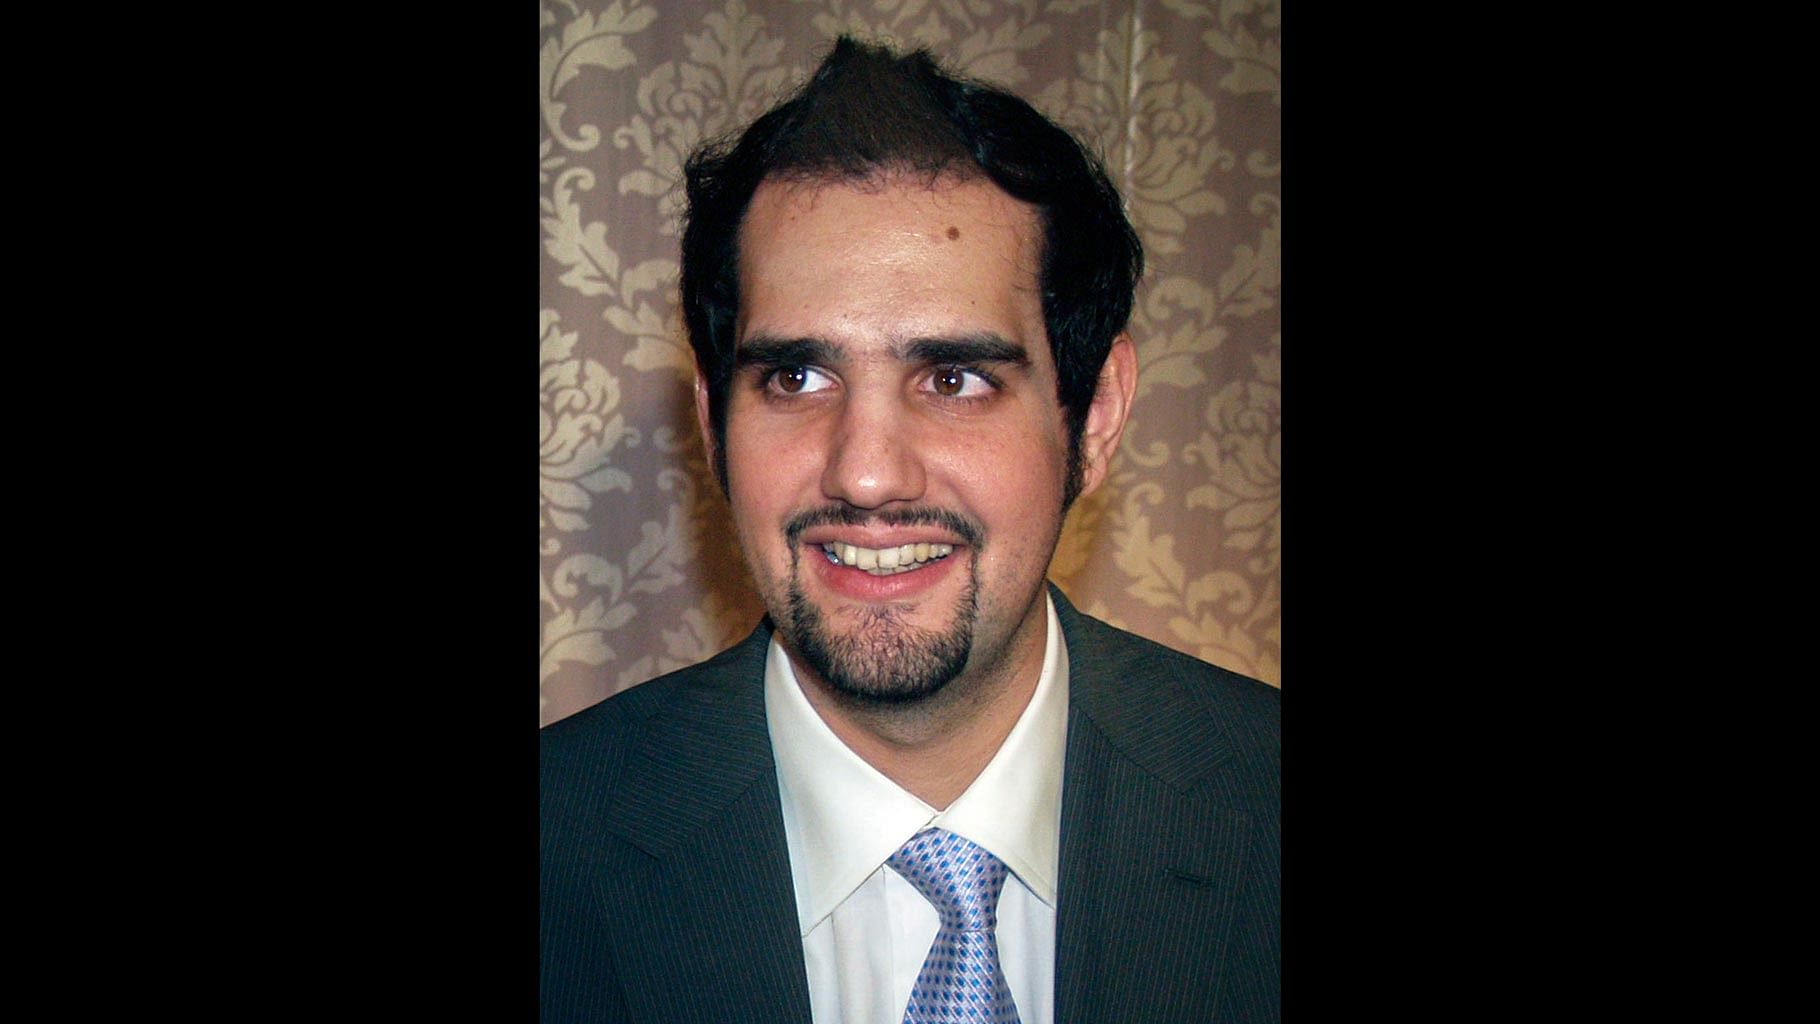 Shahbaz Taseer poses for a photograph during a family function in Lahore on 8 August 2009. (Photo: Reuters)